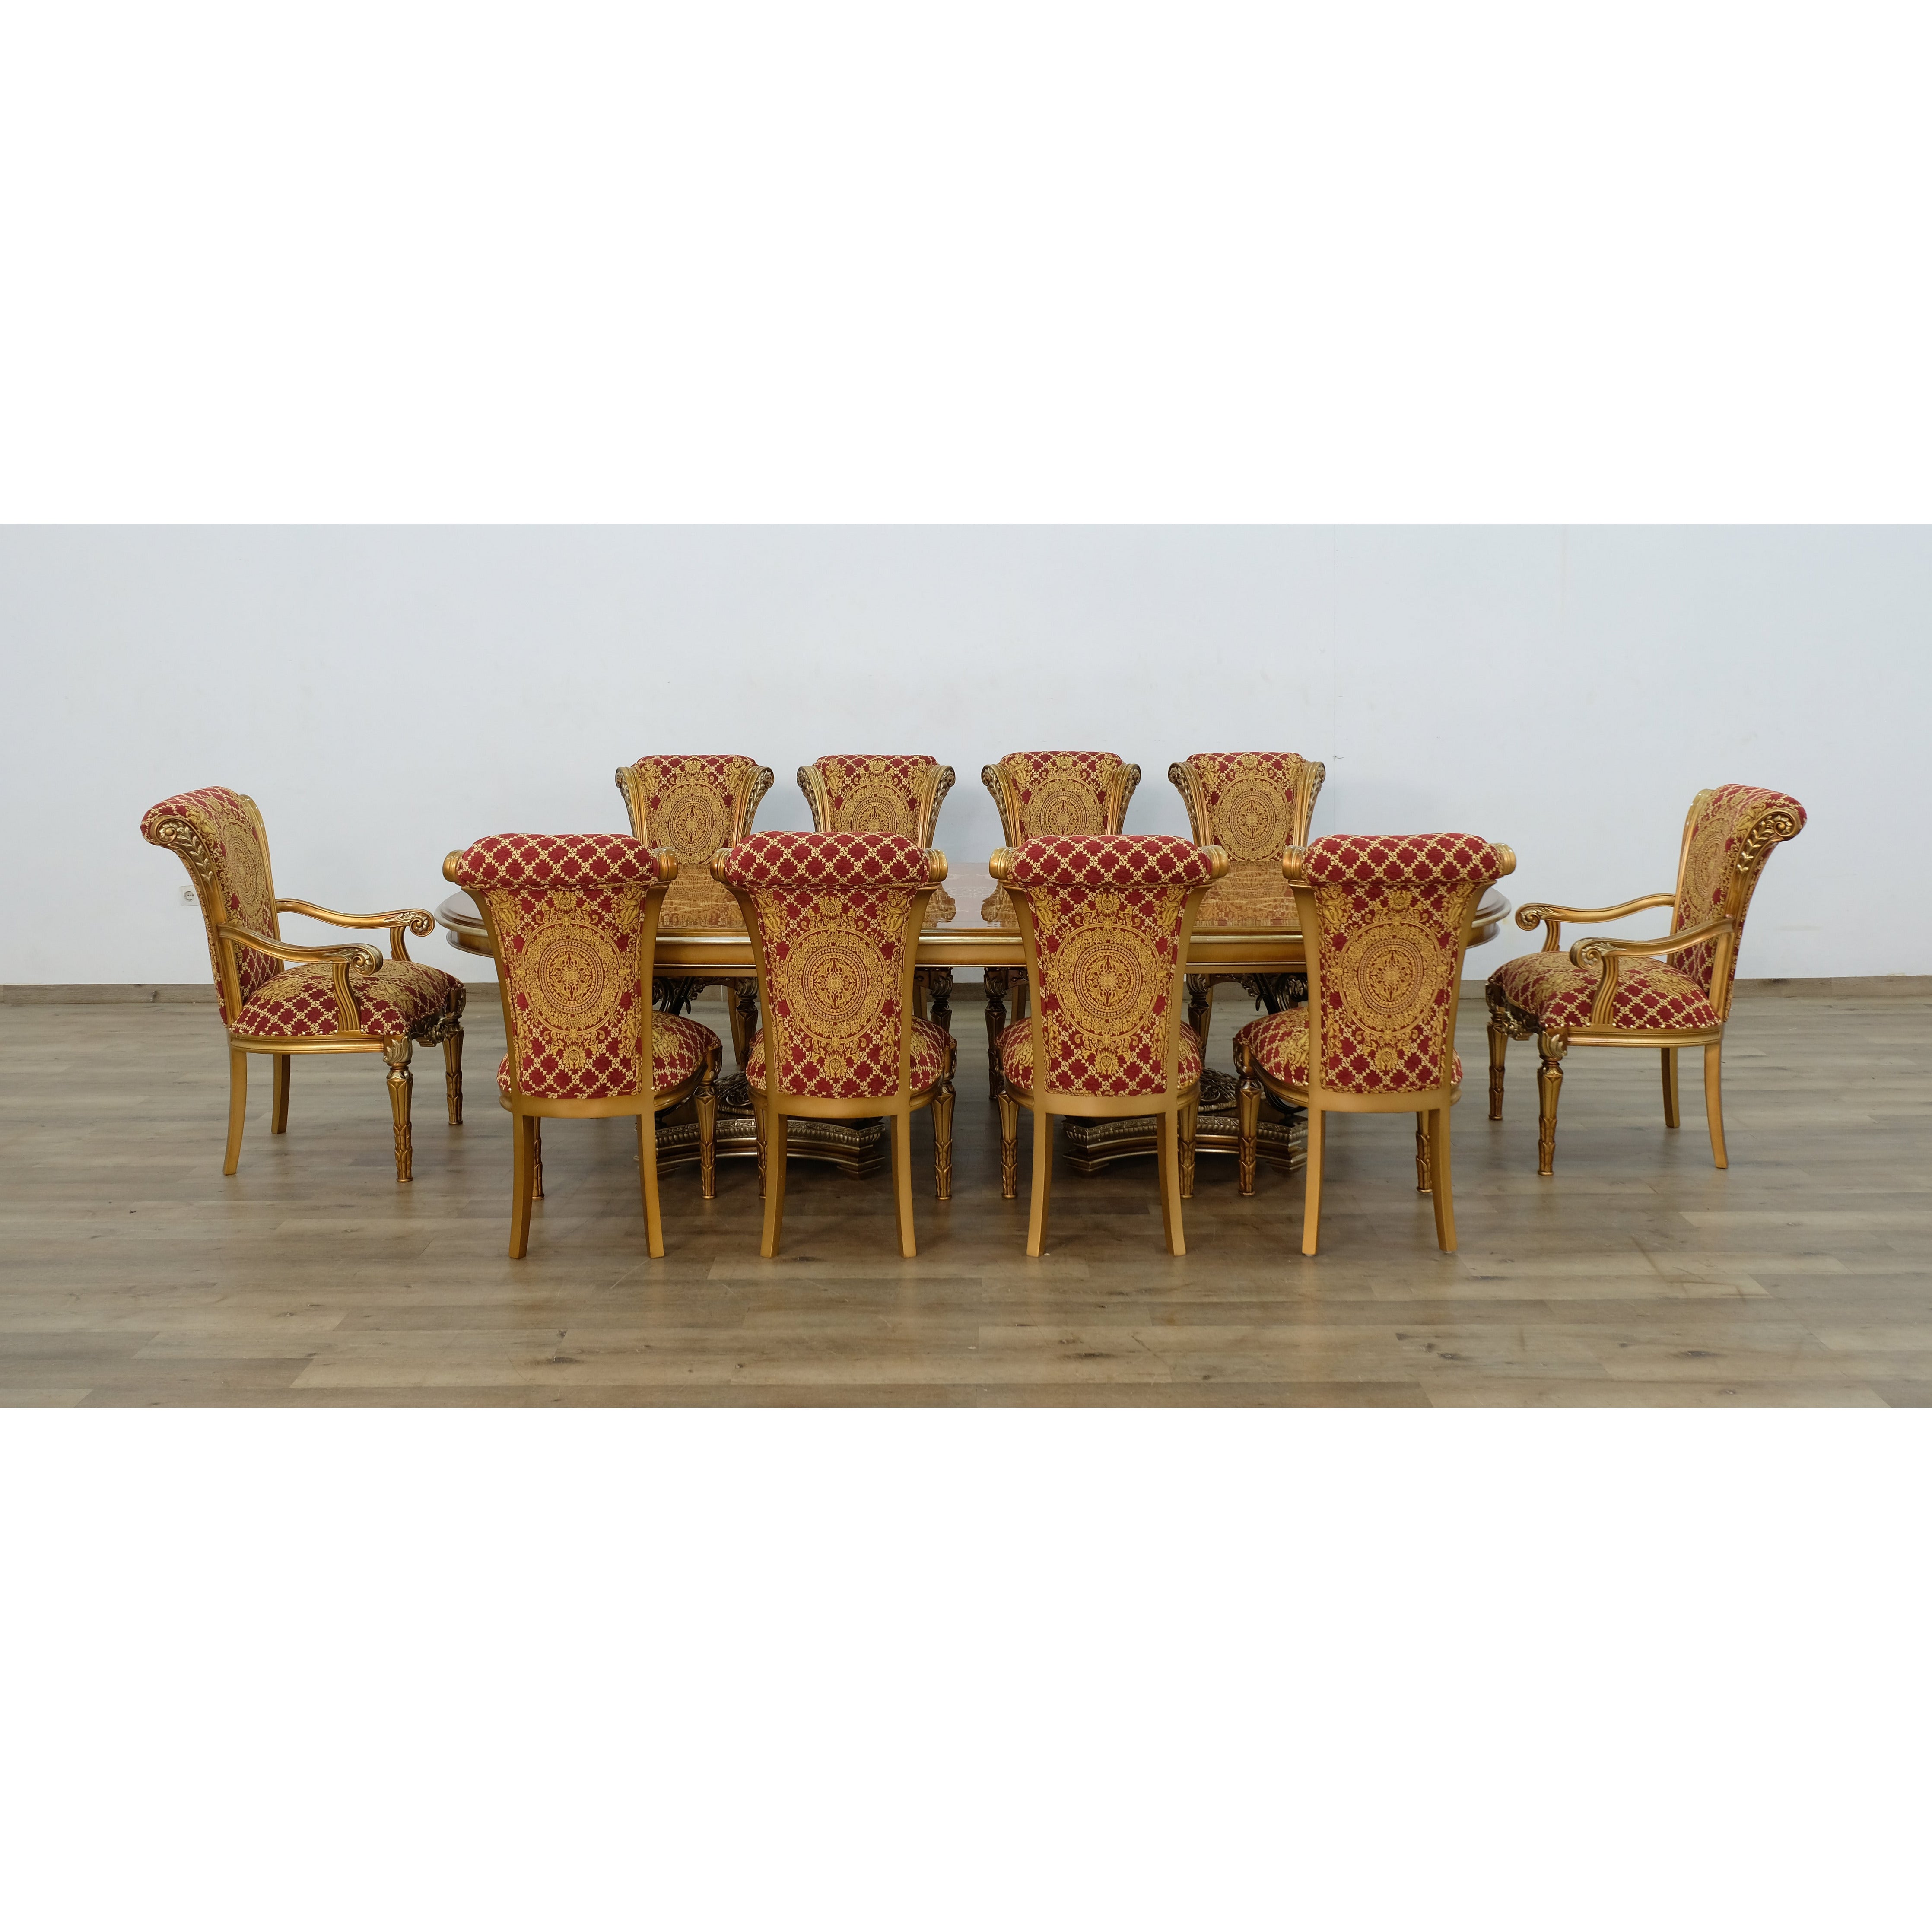 European Furniture - Valentina 11 Piece Dining Room Set With Gold Red Chair - 51955-61959-11SET - New Star Living